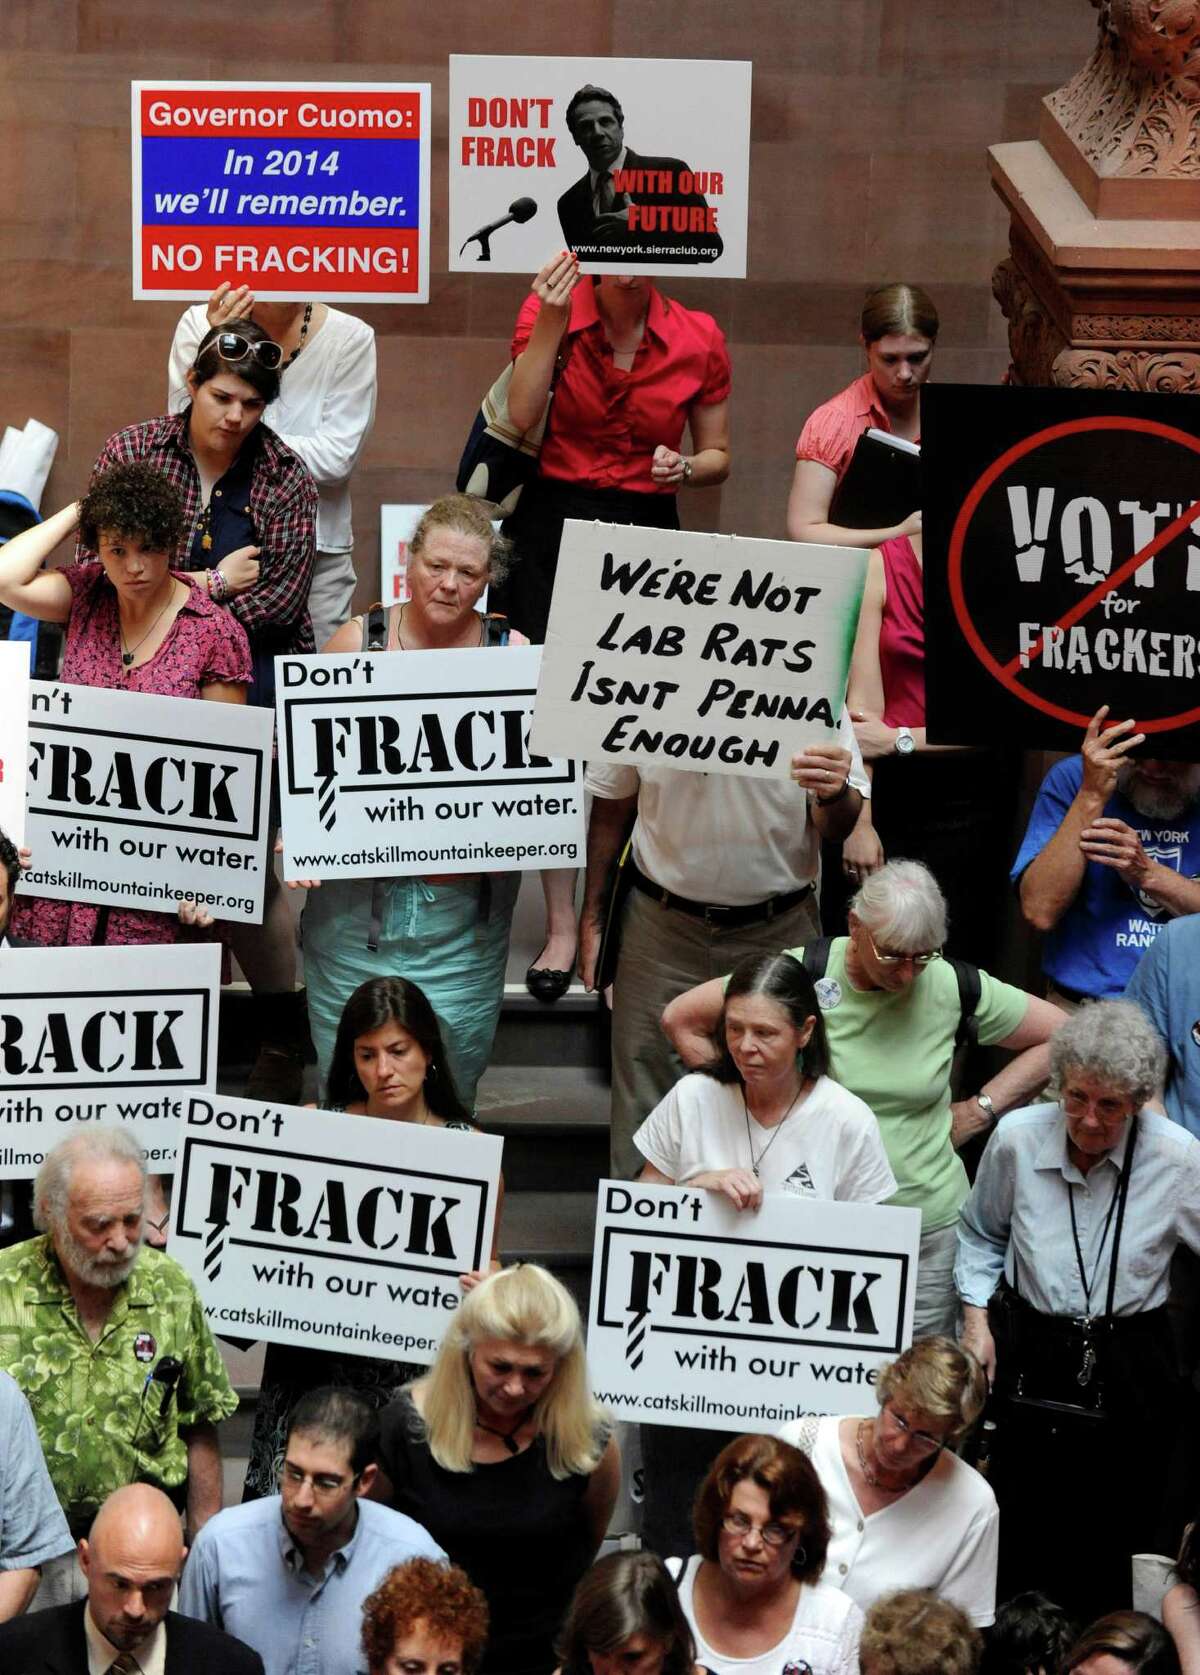 As an oil and gas boom drives drillers into areas outside the historical oil patch, an industry group has issued guidelines for improving community relations amid protests like these in Albany, N.Y. (AP Photo/Tim Roske, File)